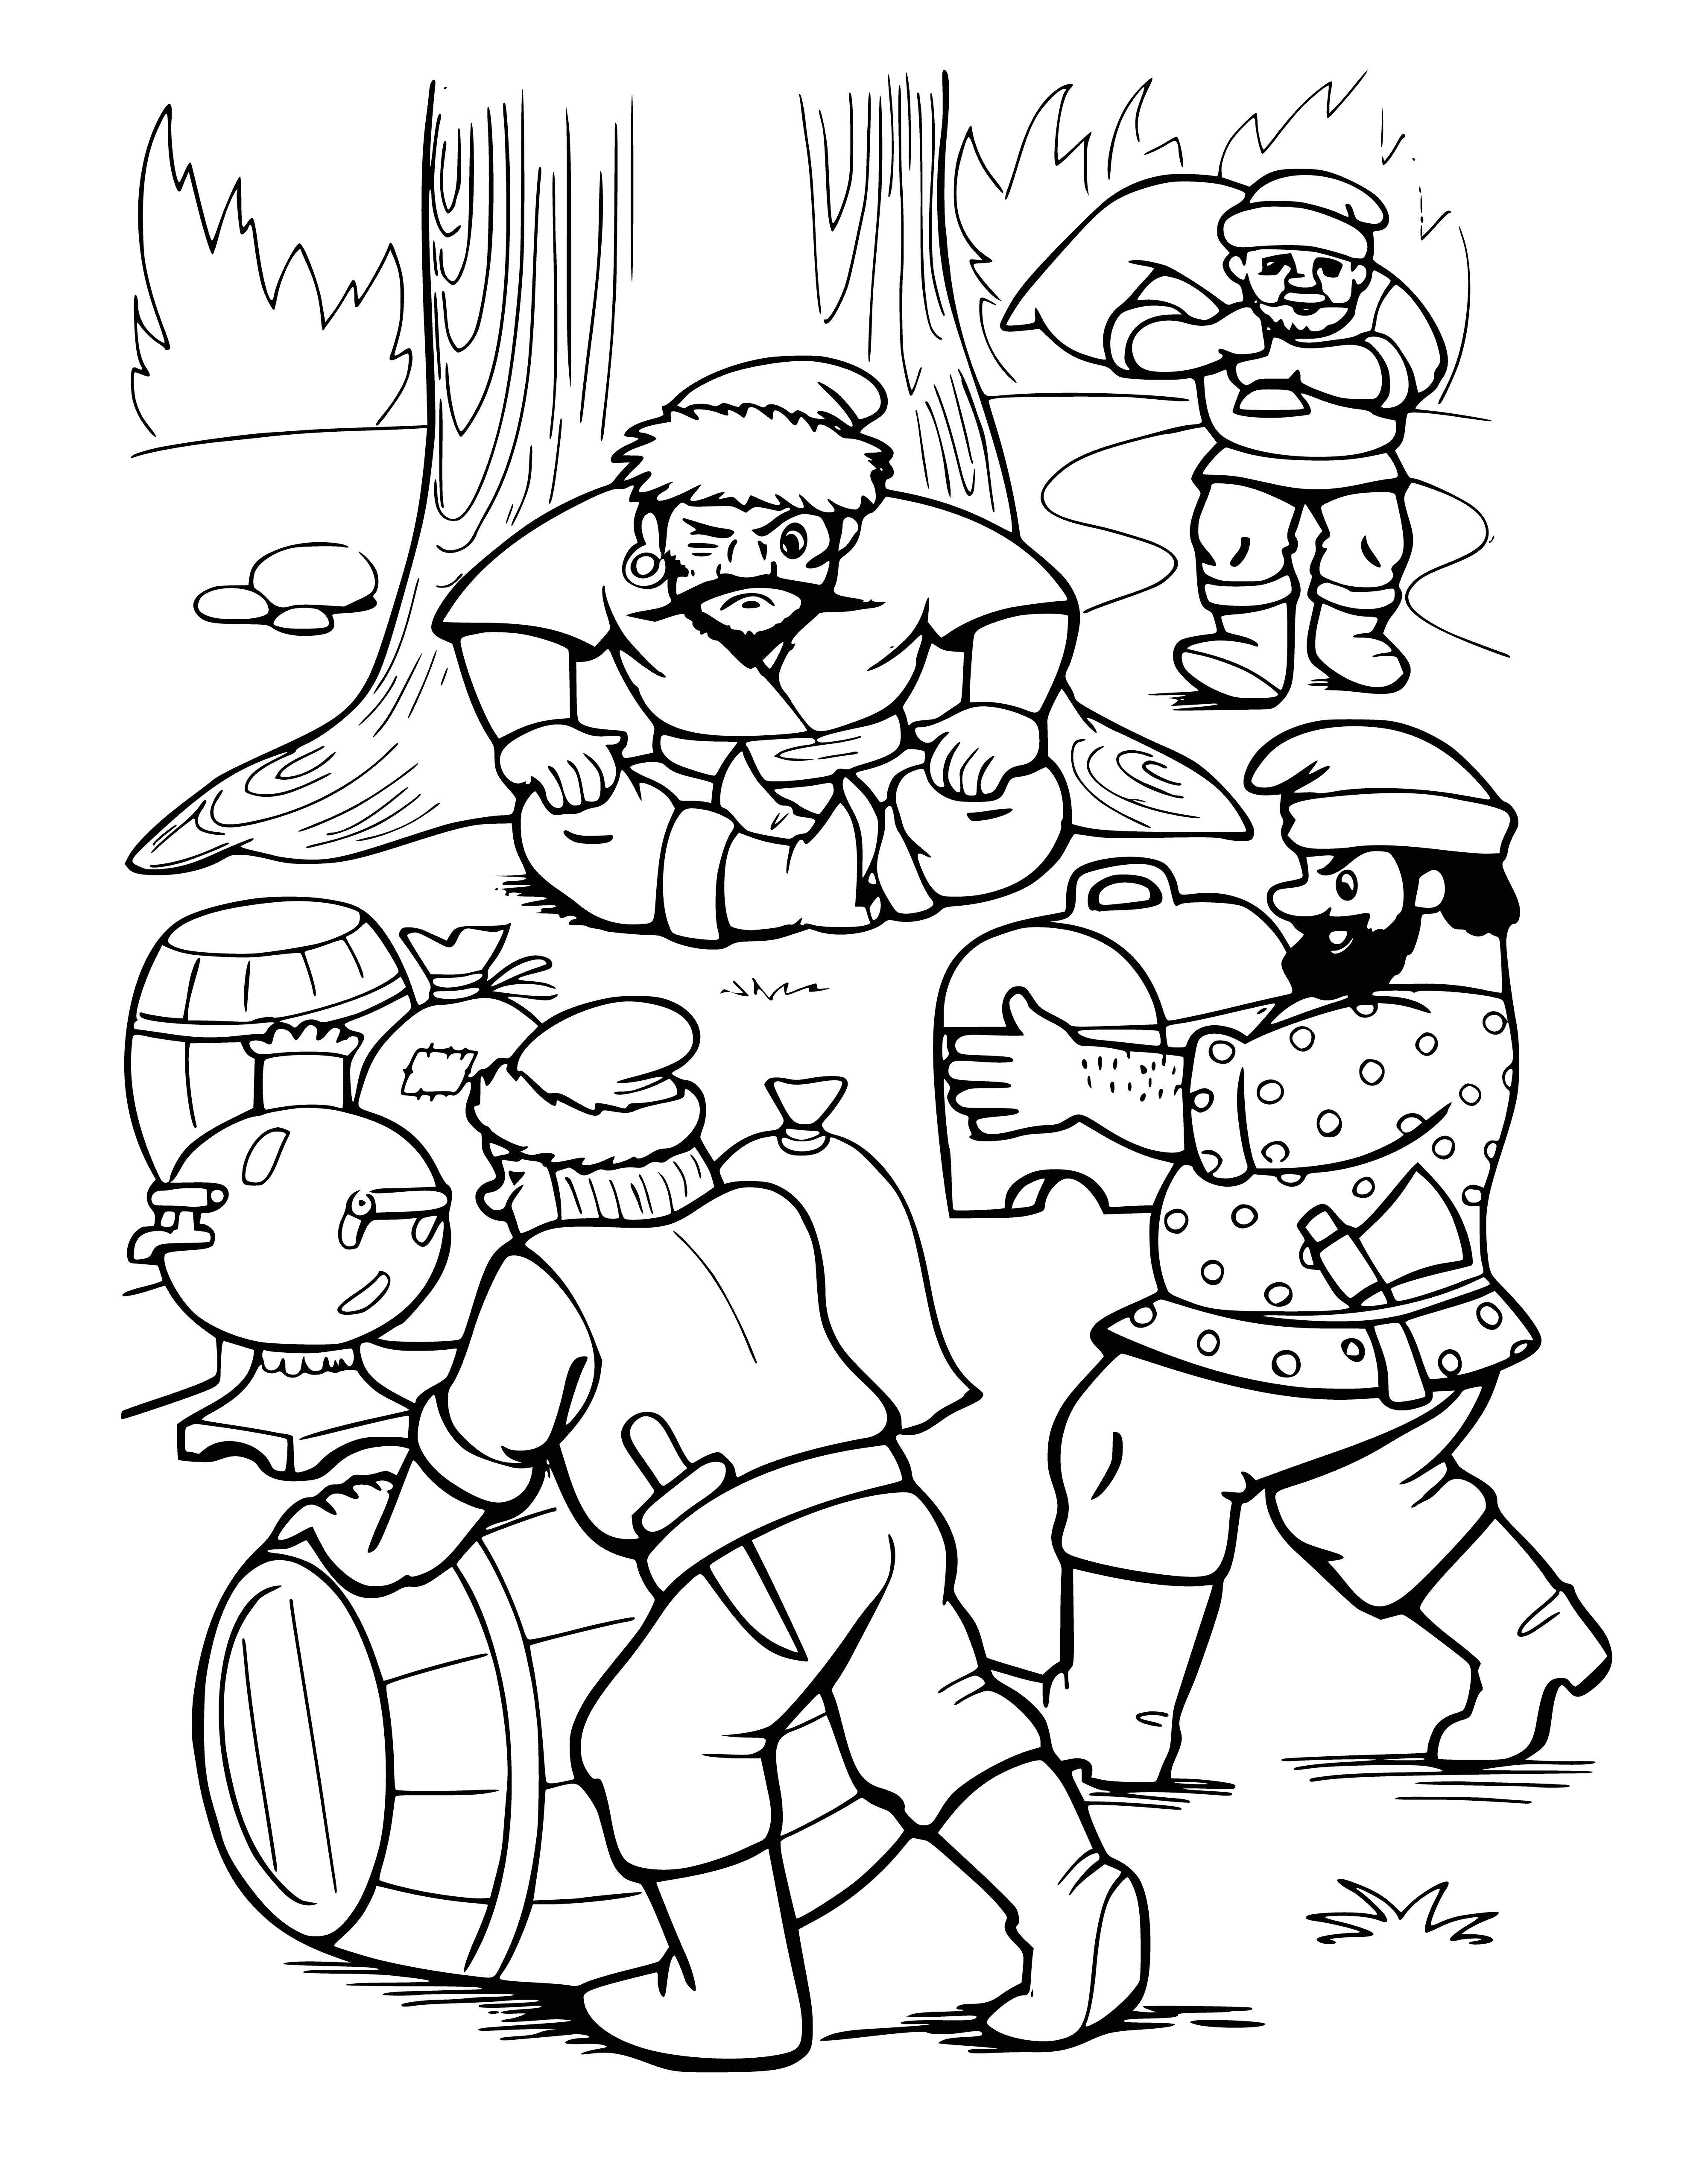 Looted goods coloring page